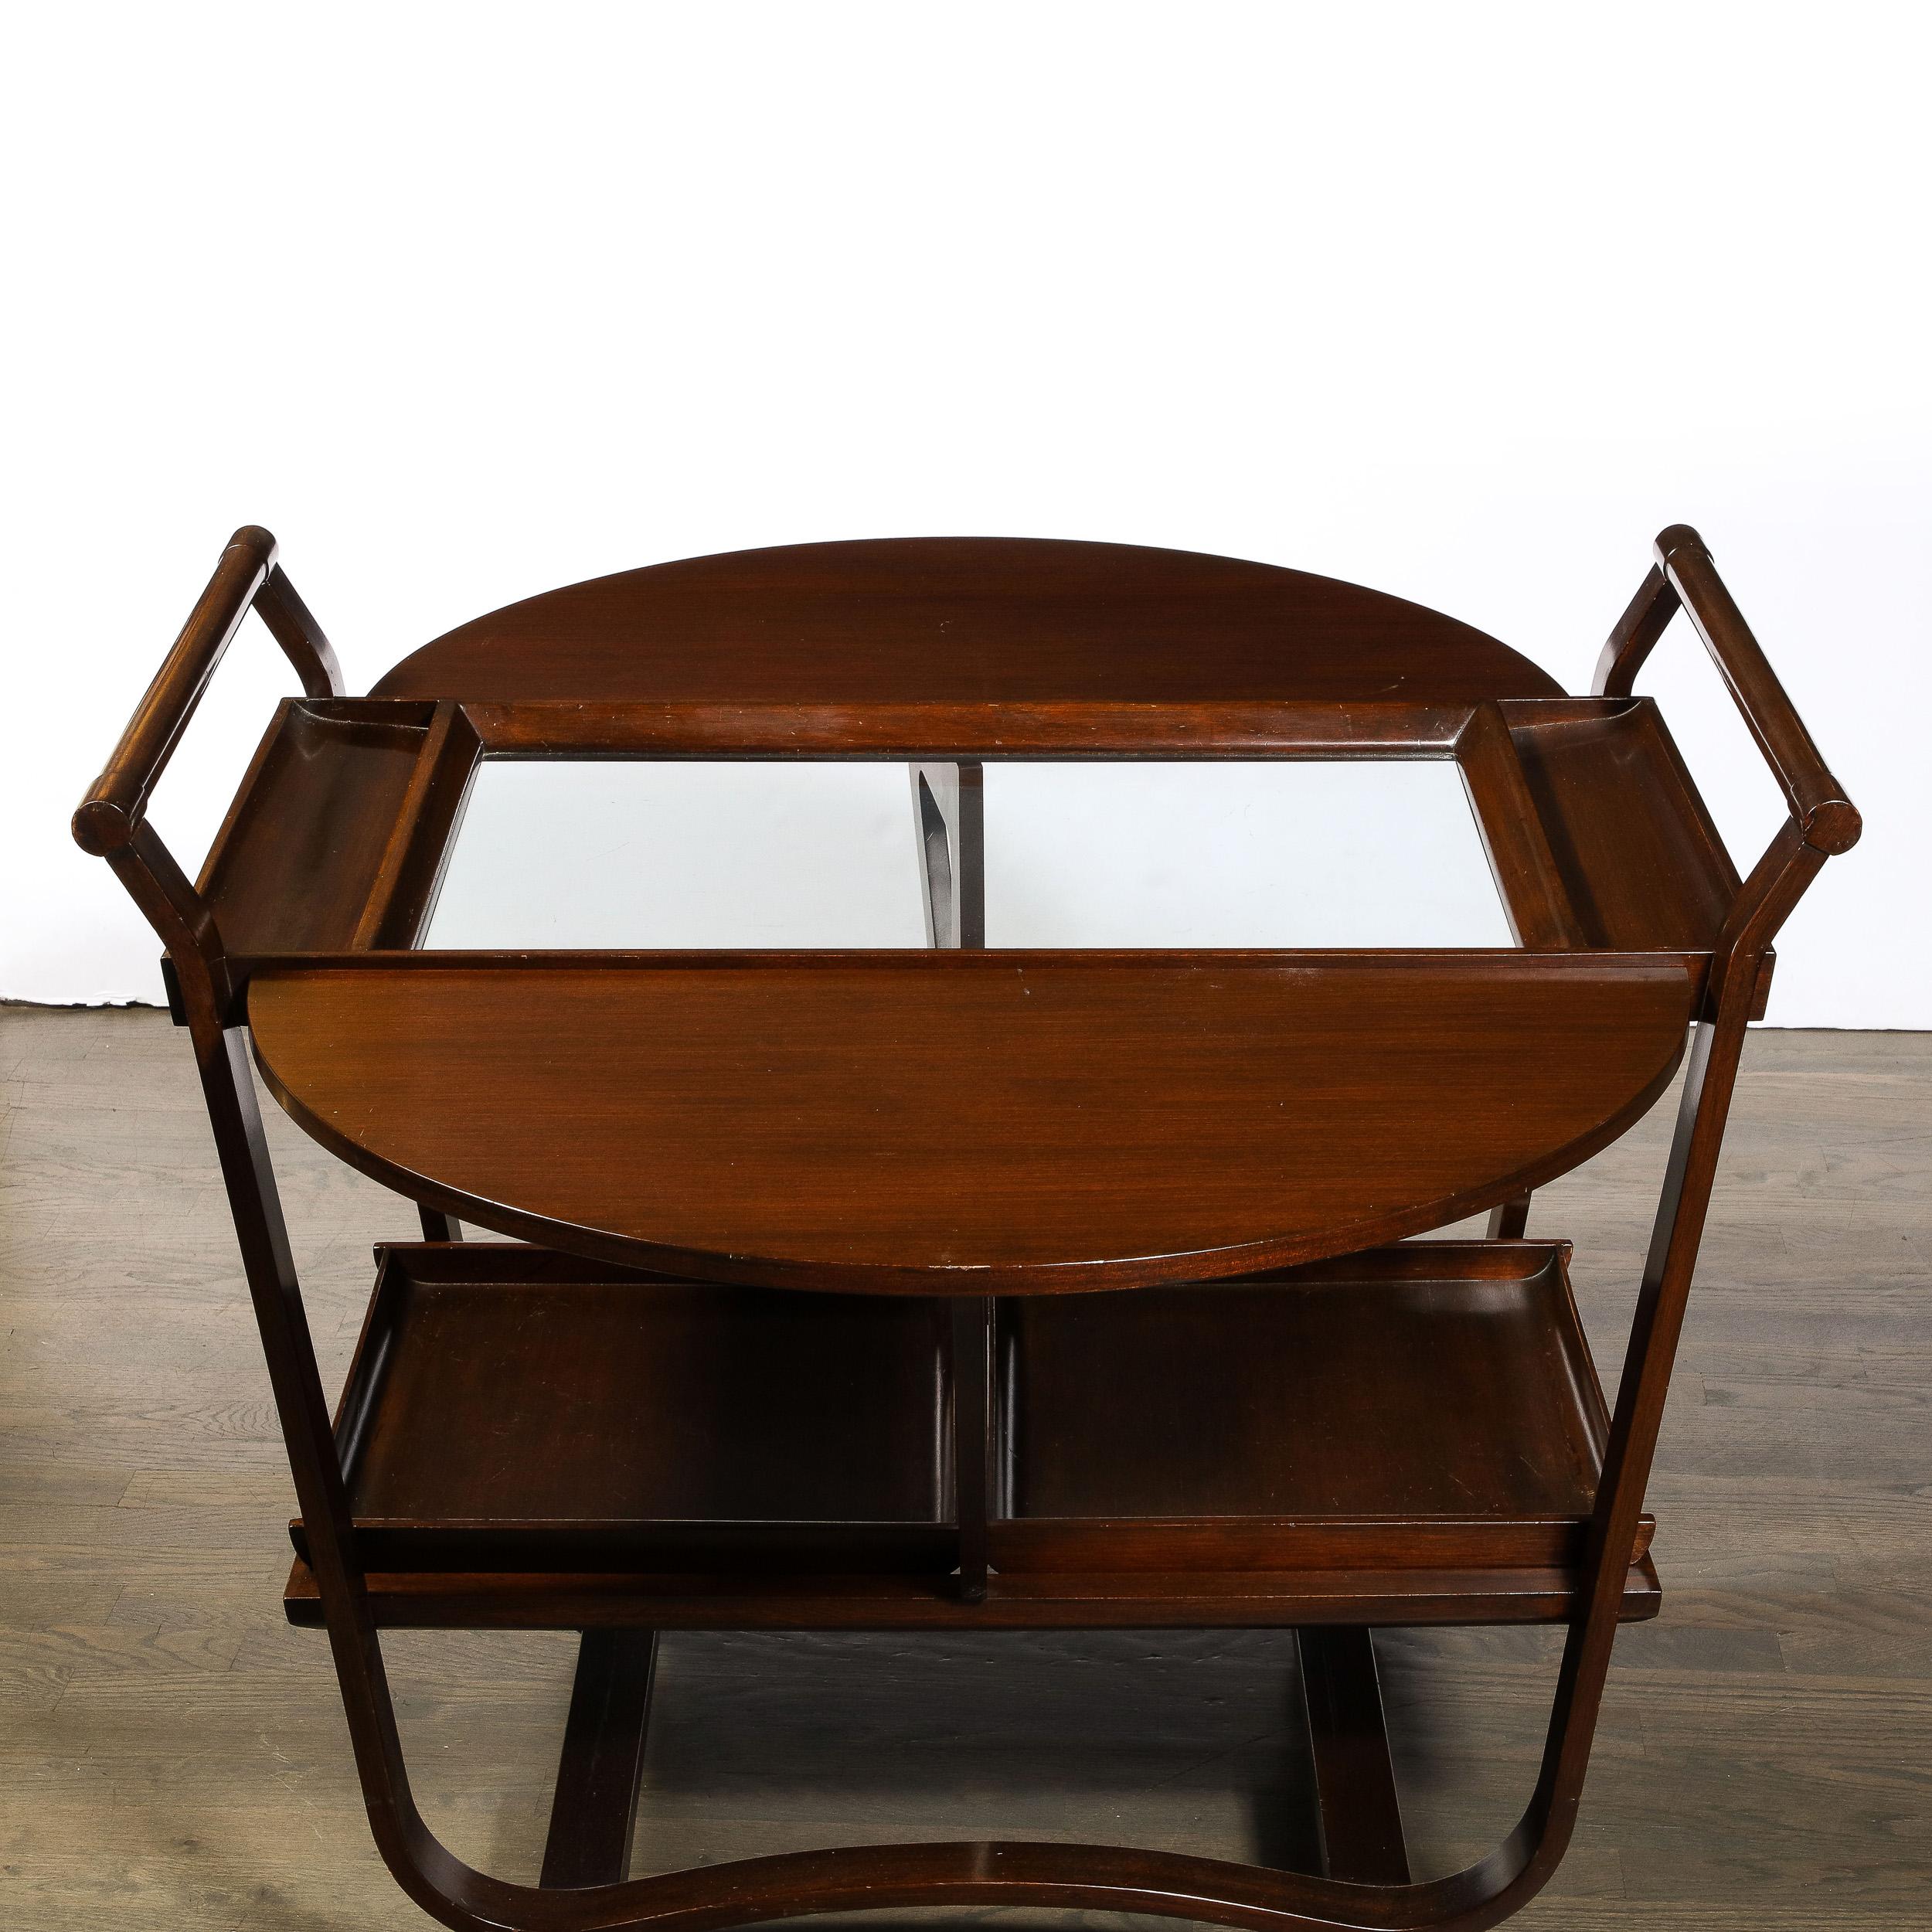 This Mid-Century Modernist Walnut Drop Leaf Bar Cart was created by the illustrious designer Edward Wormley for Dunbar originating from the United States, Circa 1950. Featuring a lovely combination of bent wood framework and simplified geometric